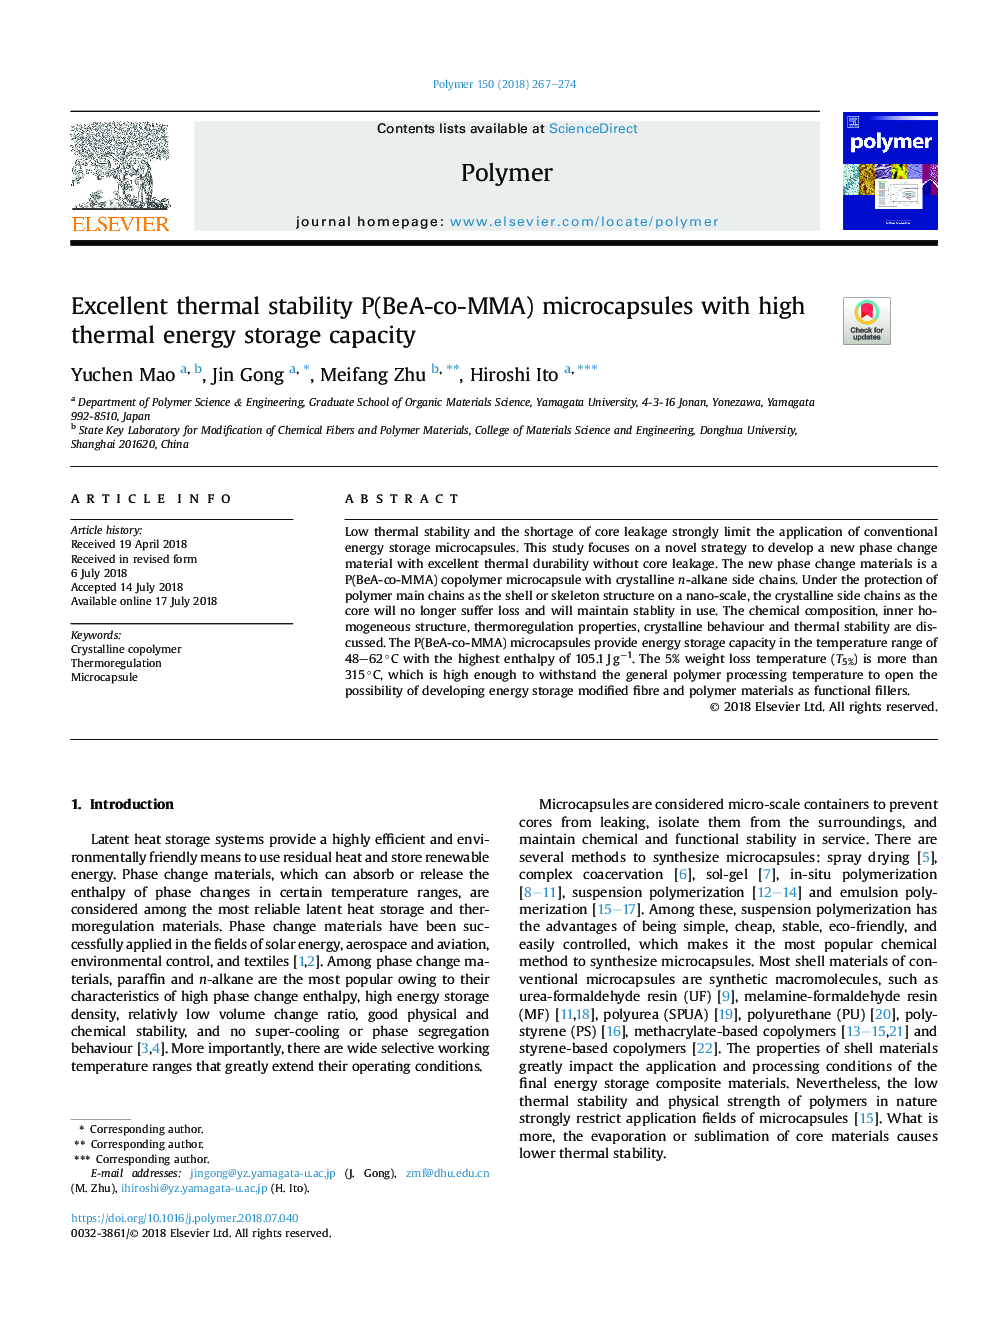 Excellent thermal stability P(BeA-co-MMA) microcapsules with high thermal energy storage capacity